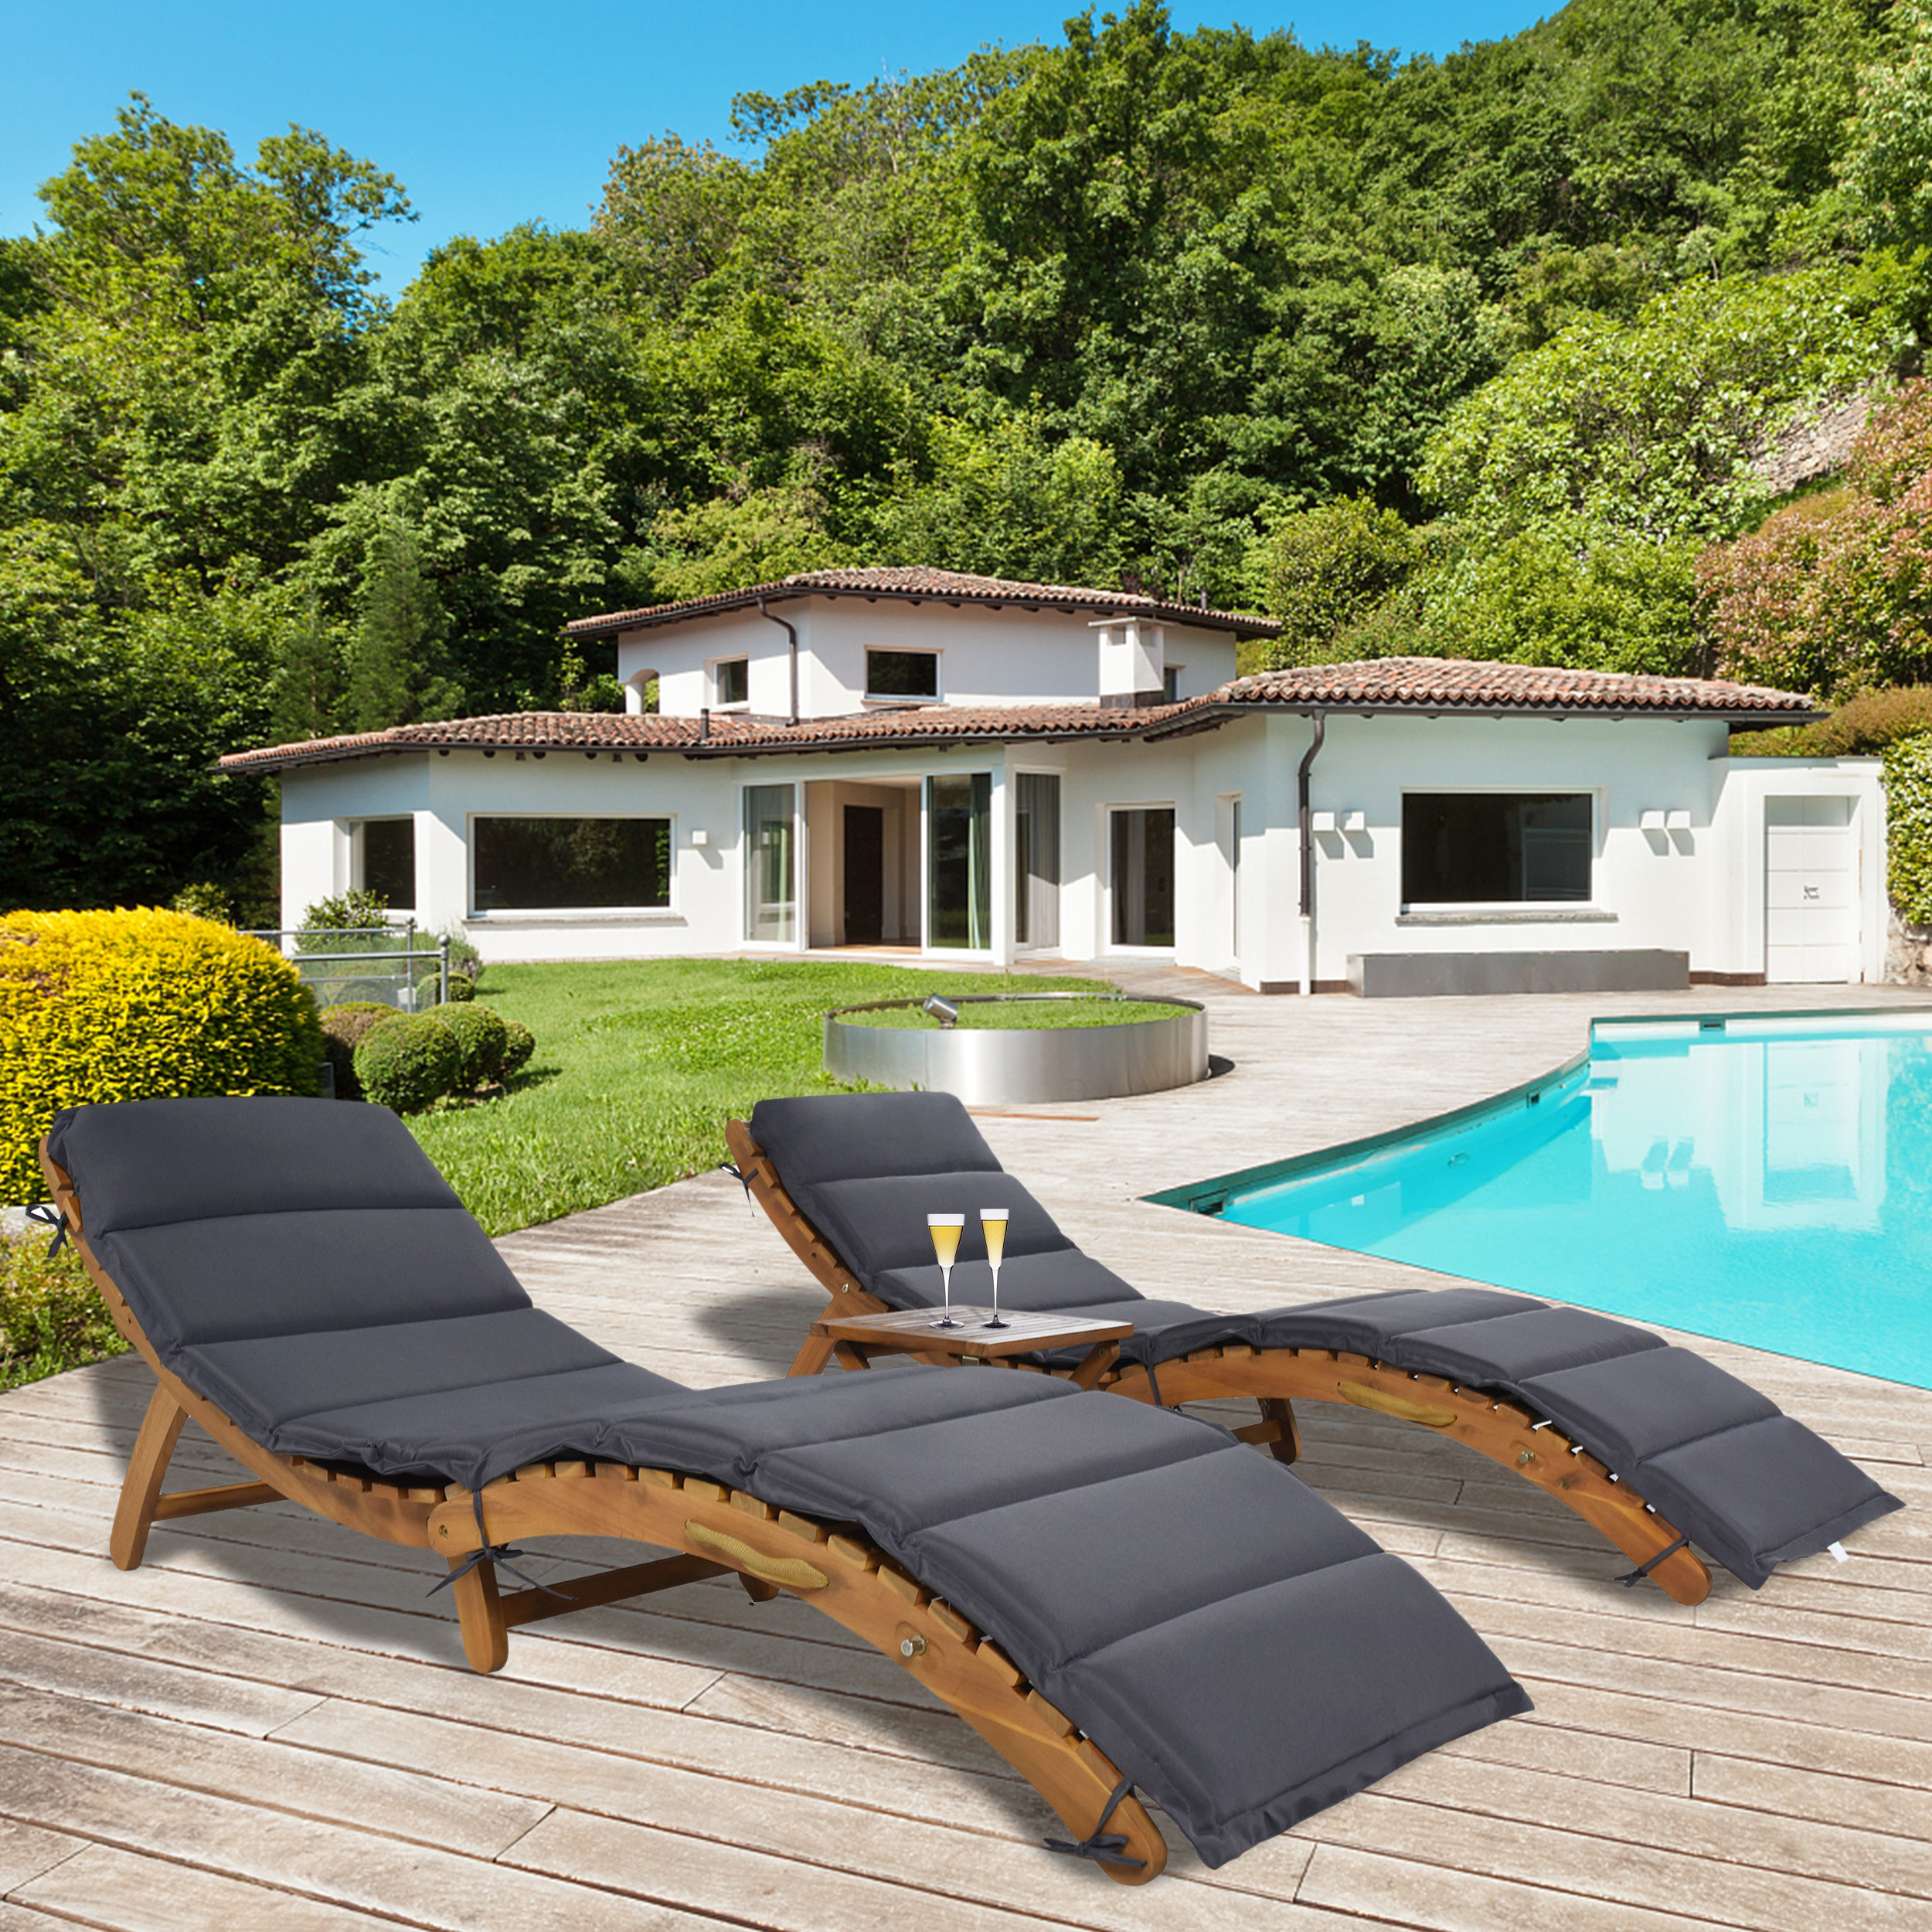 3 Pieces Outdoor Chaise Lounge Set, Wood Patio Furniture Set Extended, 2 Foldable Chaise Lounge Chair with 1 Table, Sun Lounger for Poolside Beach Patio, Brown Lounger + Gray Cushion - image 2 of 9